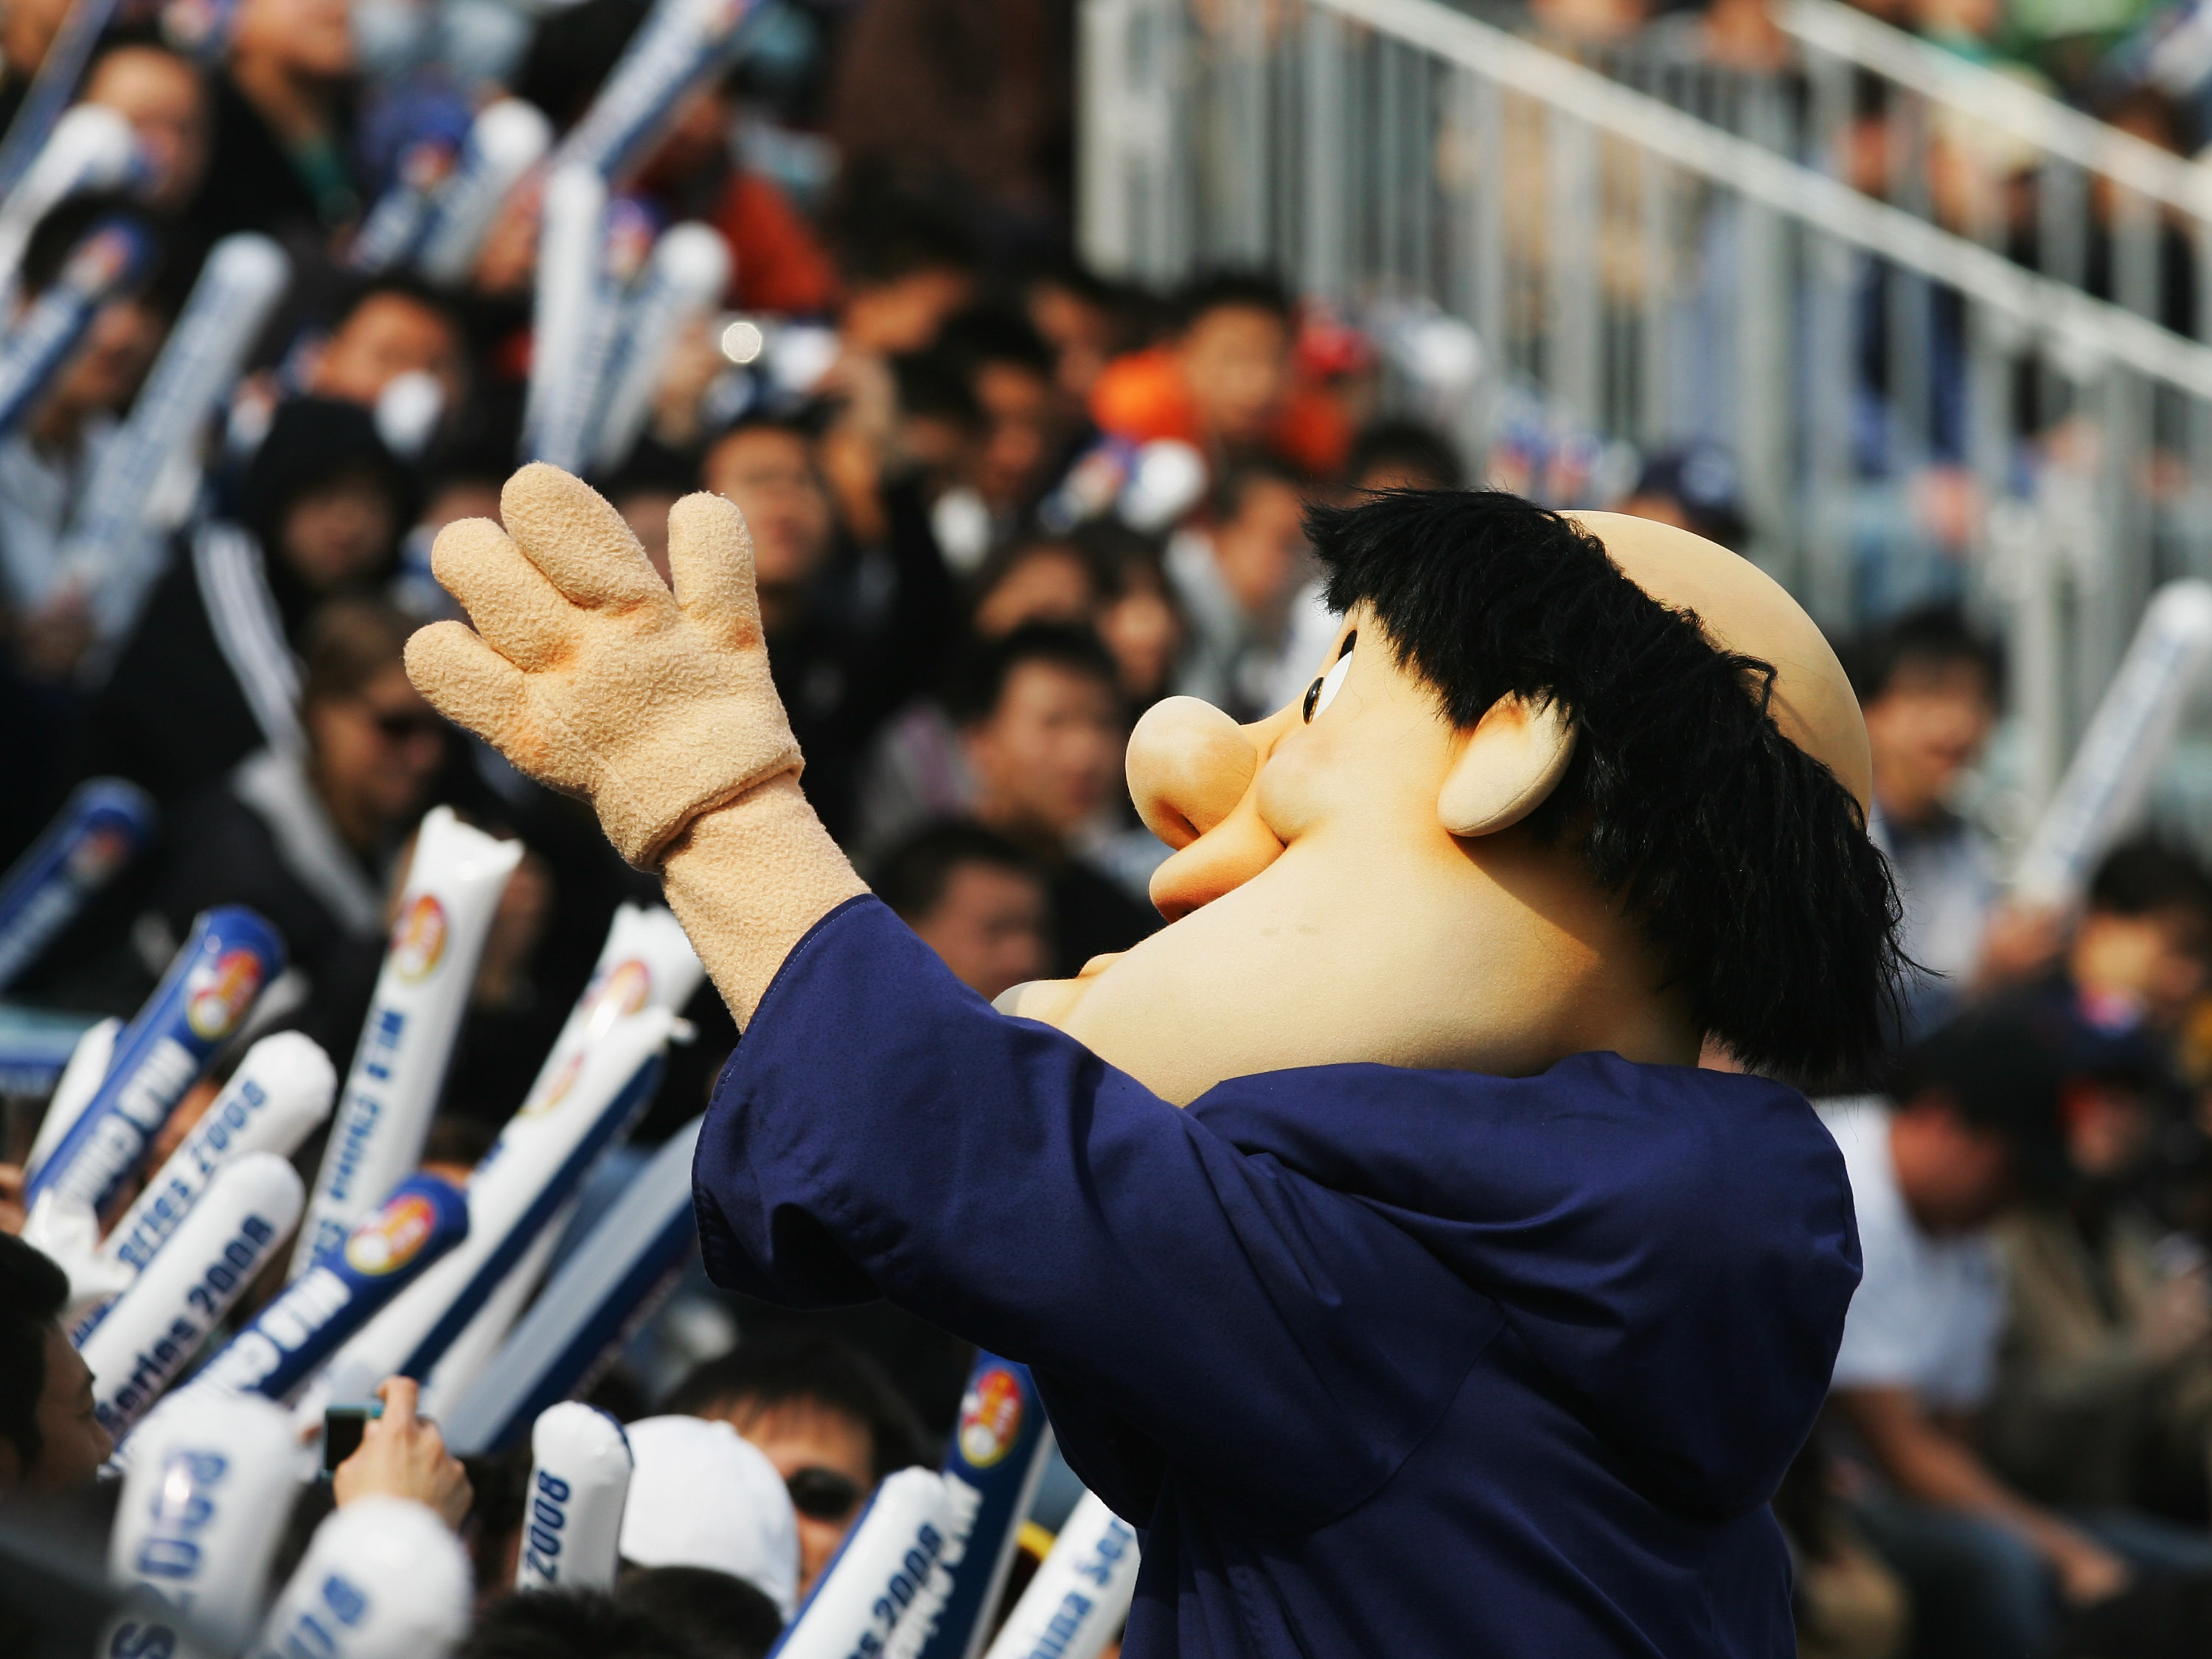 BEIJING - MARCH 16:  Swinging Friar, the San Diego Padres mascot, waves to crowd during the second game between the Los Angeles Dodgers and the San Diego Padres at Beijing's Wukesong Stadium on March 16, 2008 in Beijing, China. The Padres played against t